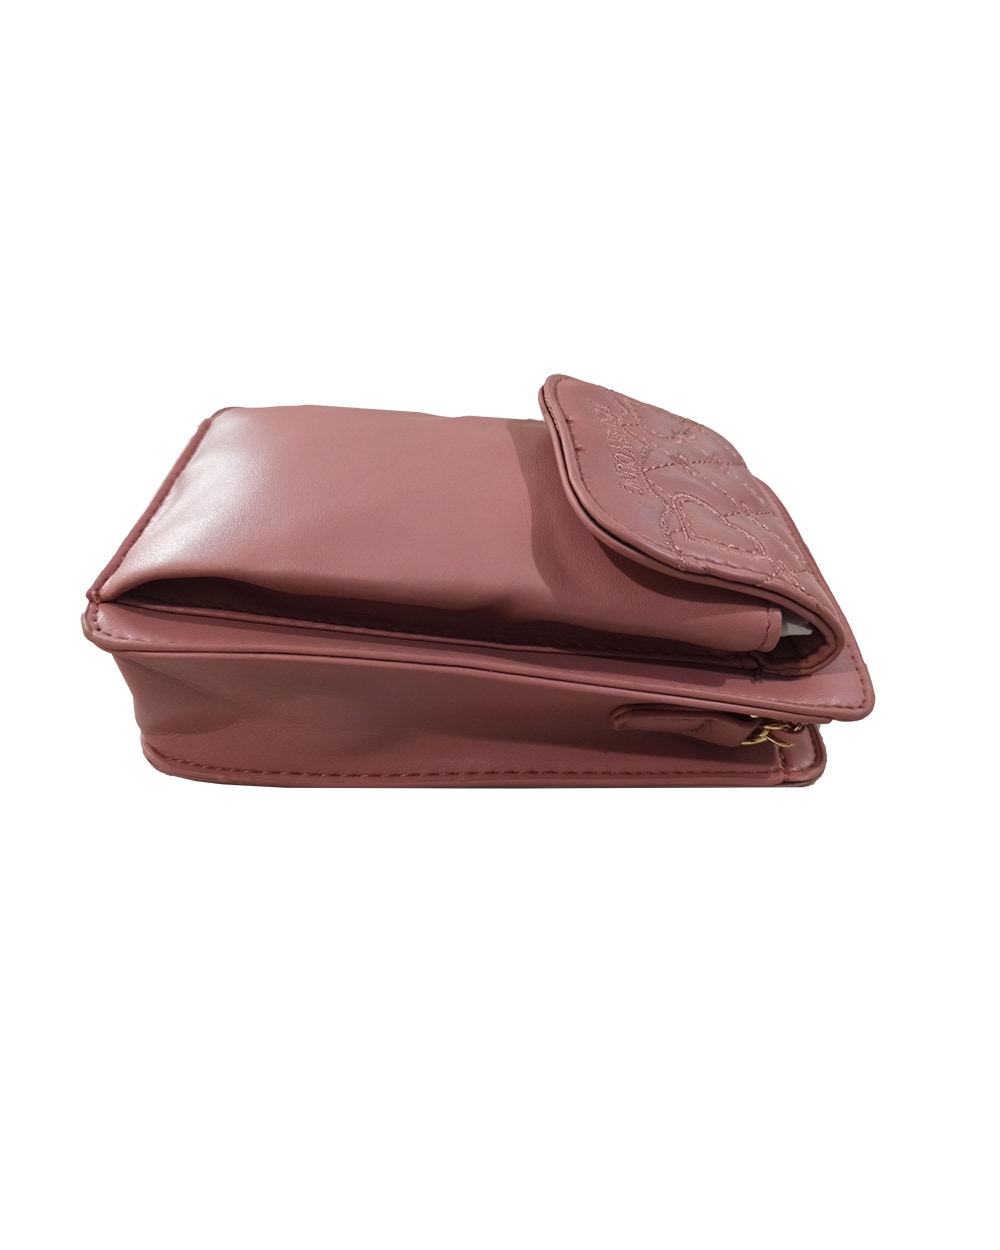 mobile cash and carry pink stylish bag - 4